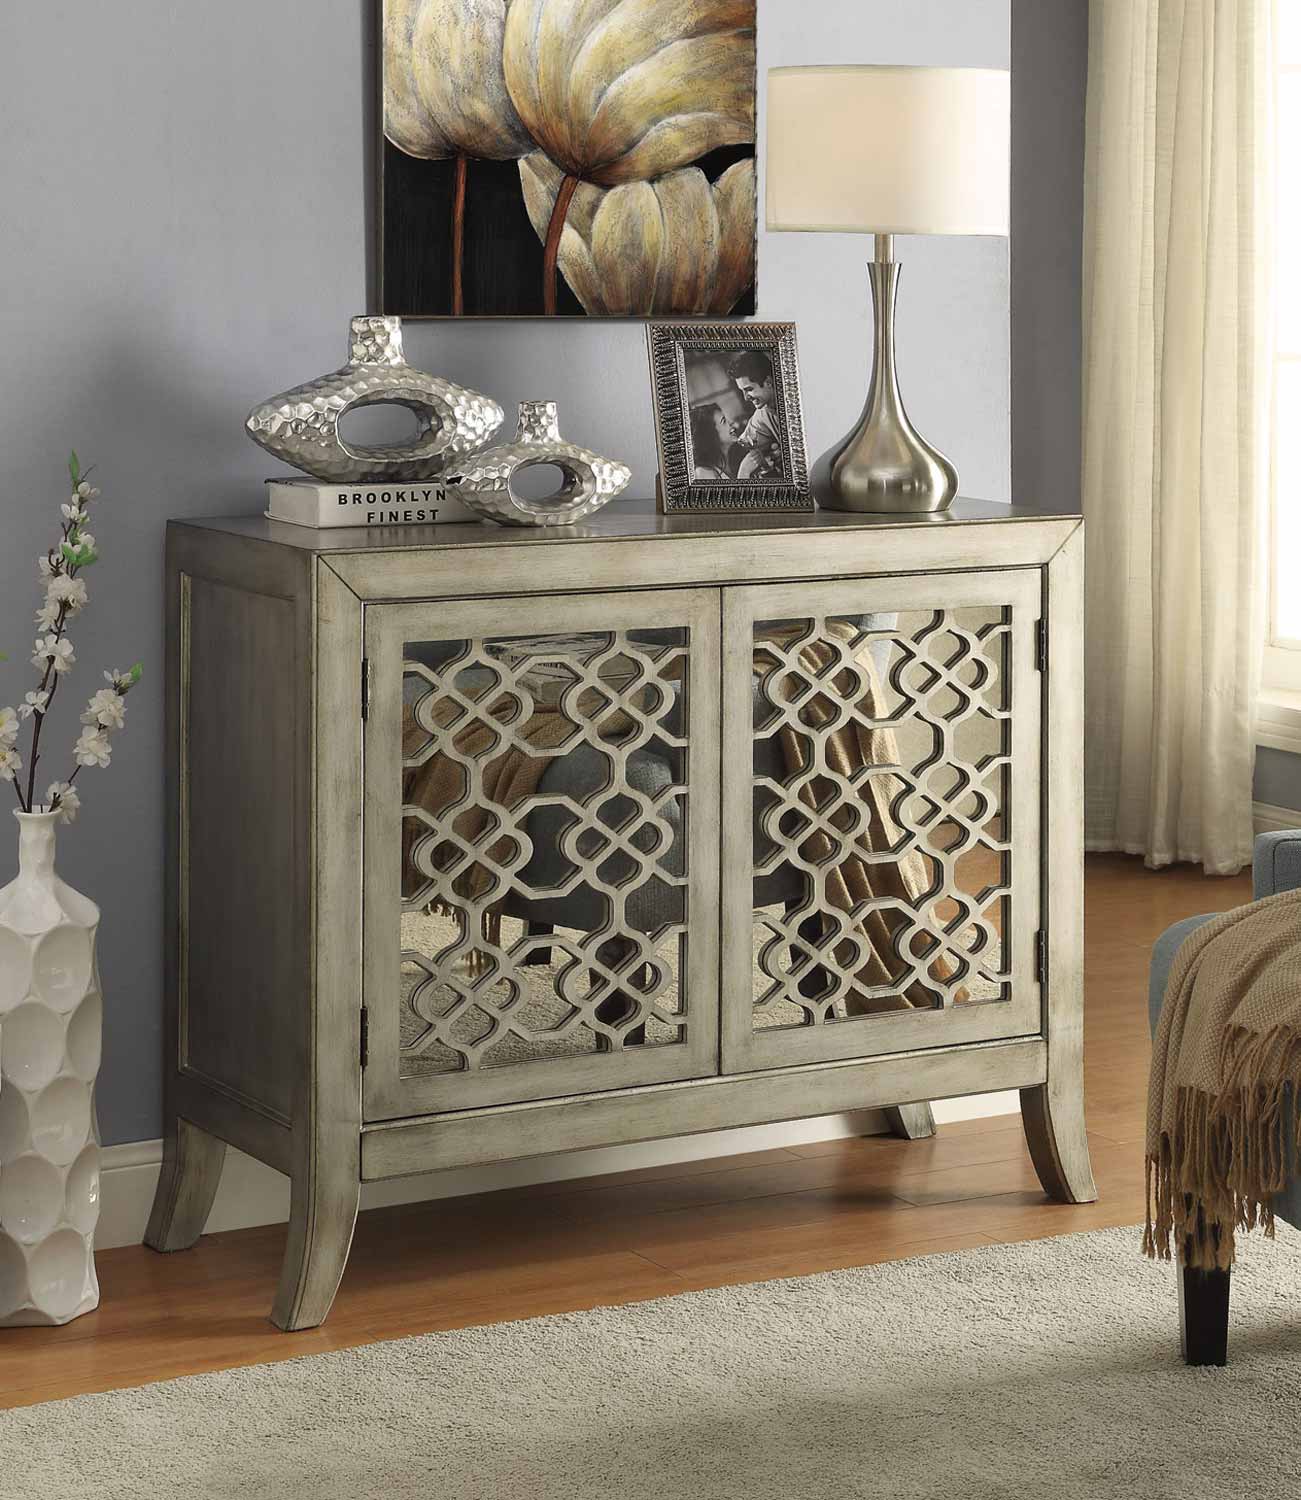 Coaster 950320 Accent Cabinet - Silver 950320 at Homelement.com